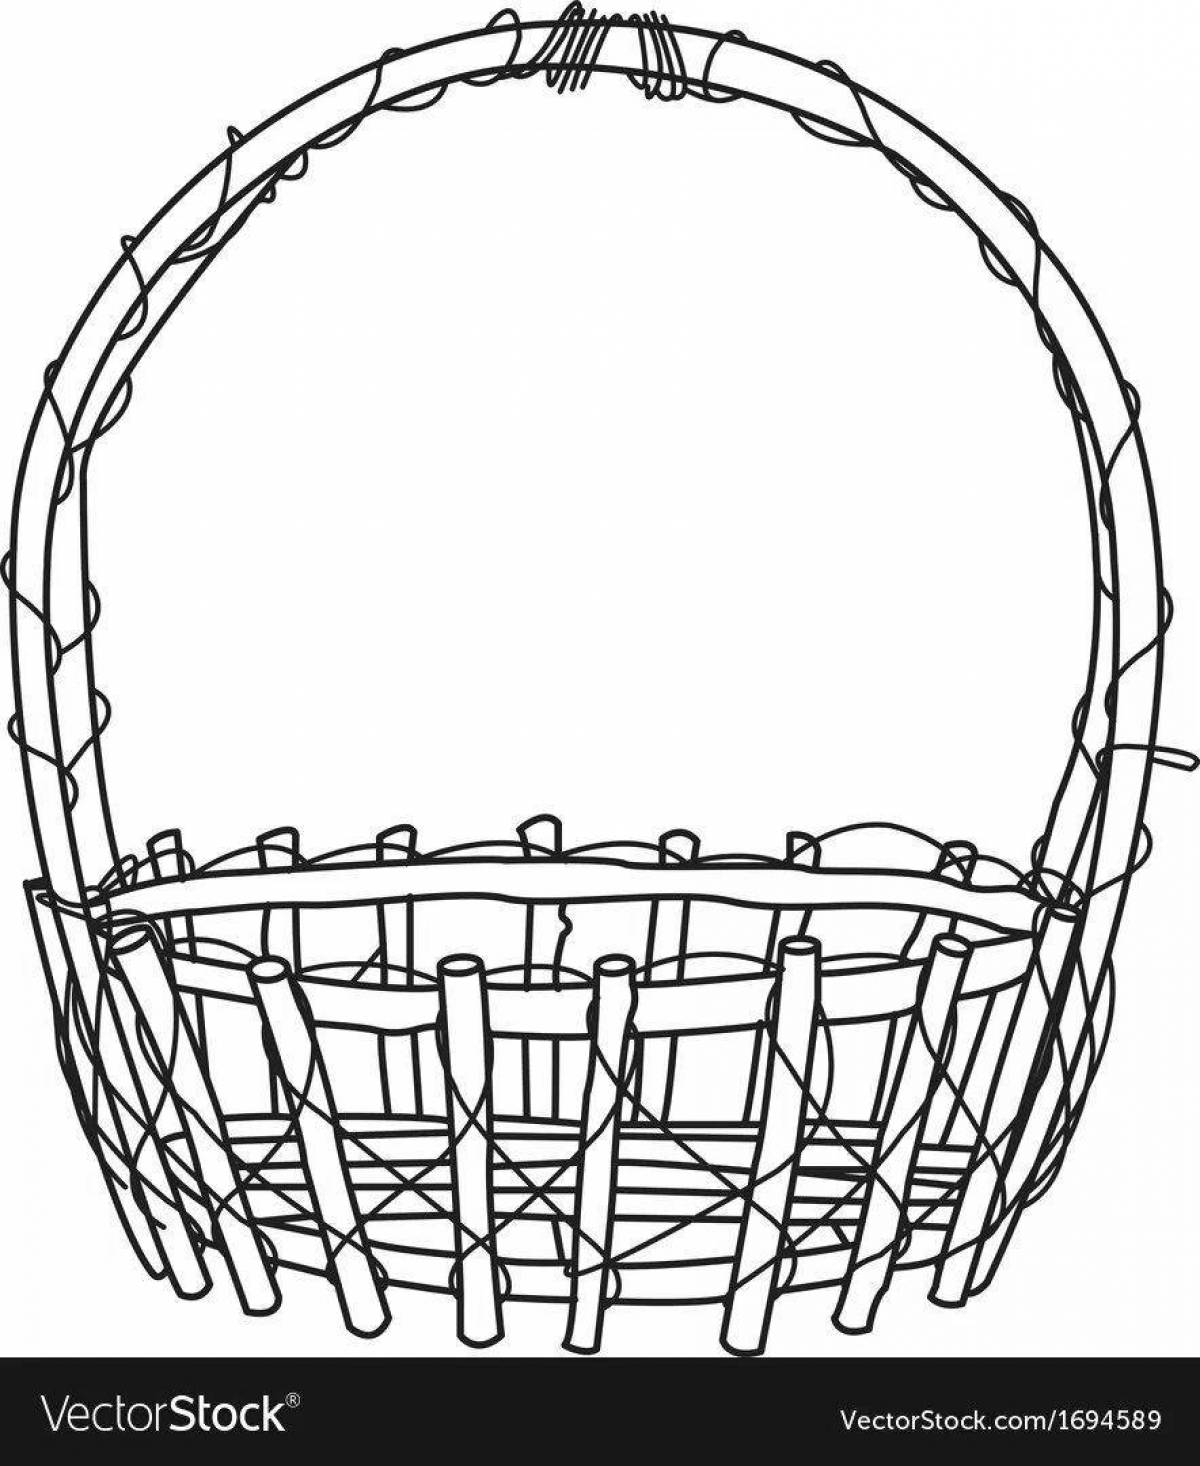 Adorable empty basket coloring book for kids